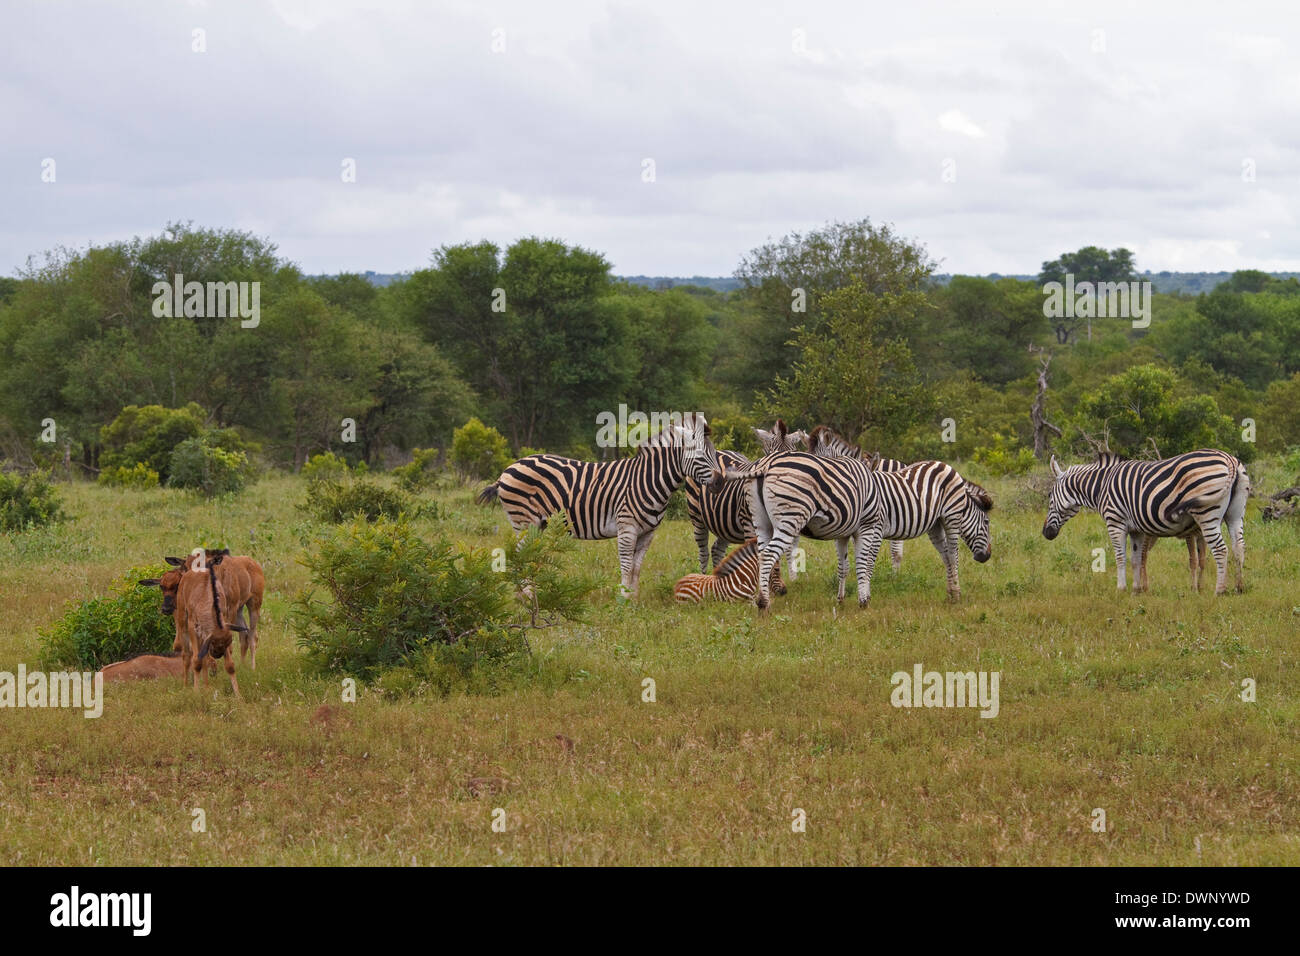 A small group of Burchell's Zebras (Equus quagga burchelli) and calves of Mozambique gnu, Kruger National Park South Africa Stock Photo